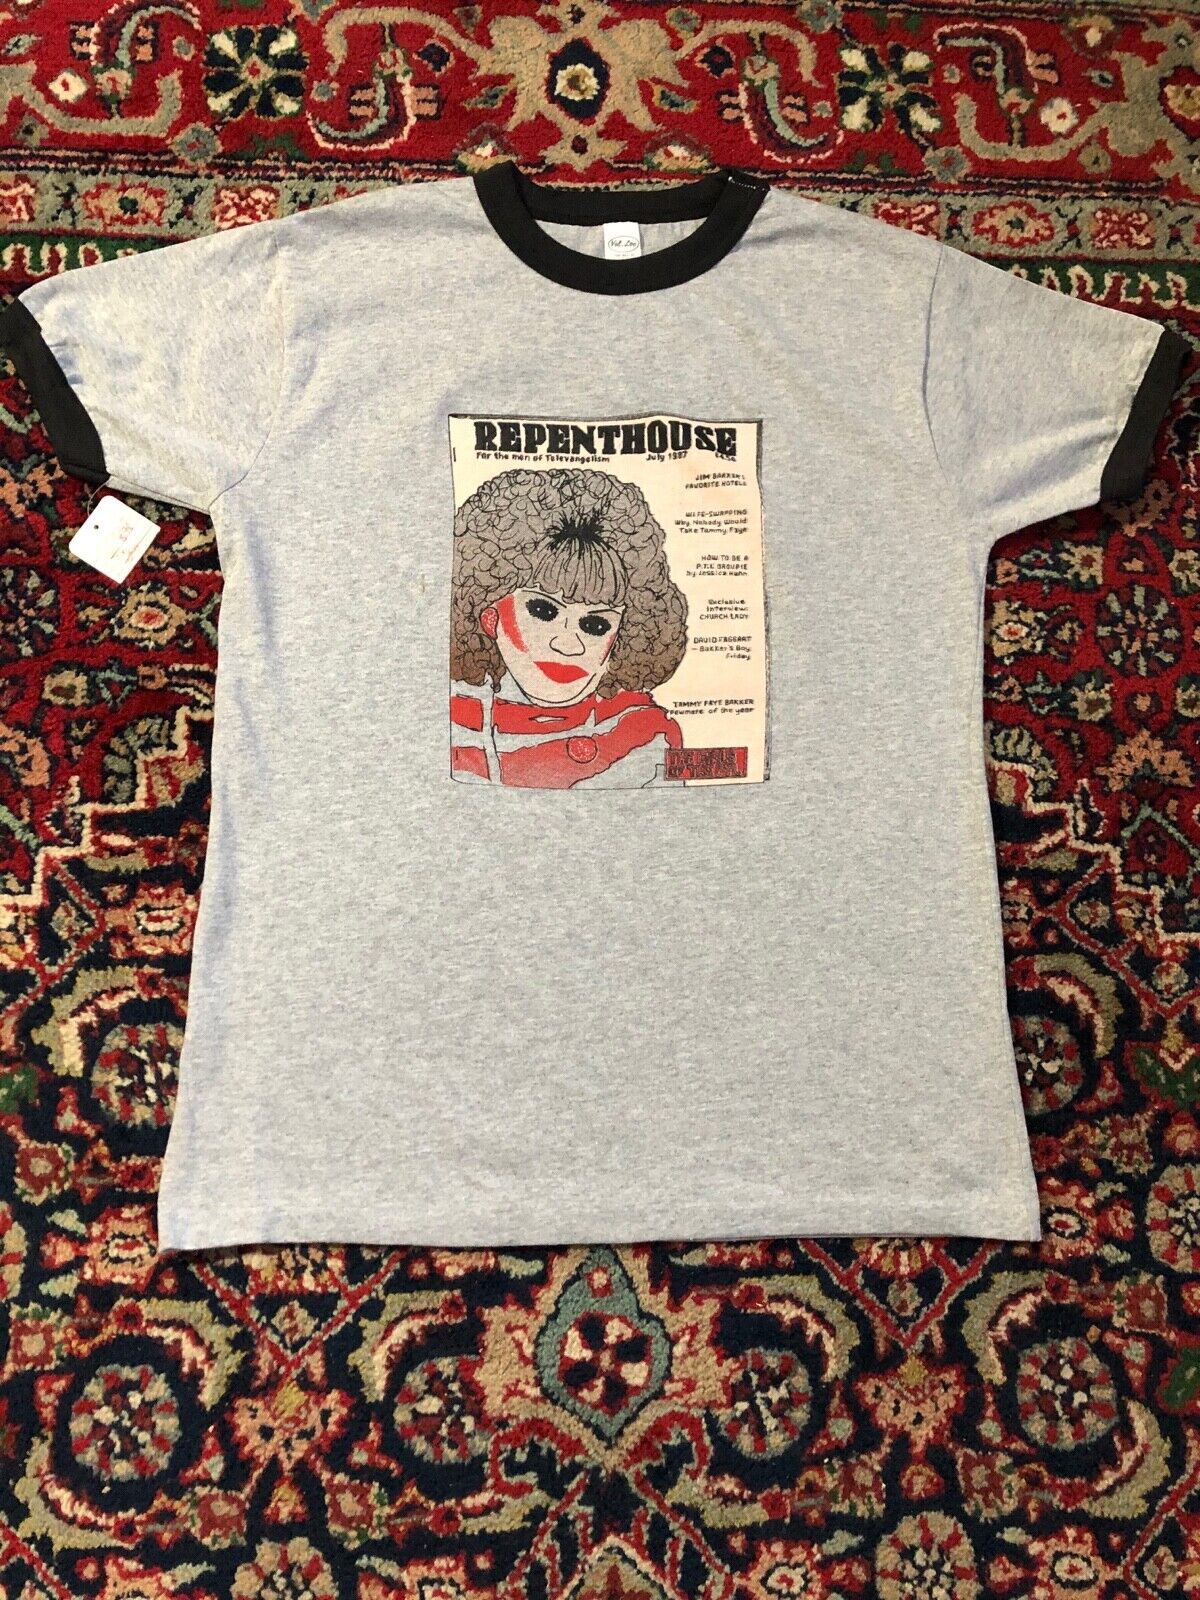 Vintage 80s Beverly Hills Hibillys bootleg Repenthouse sex T shirt size large eBay picture image picture